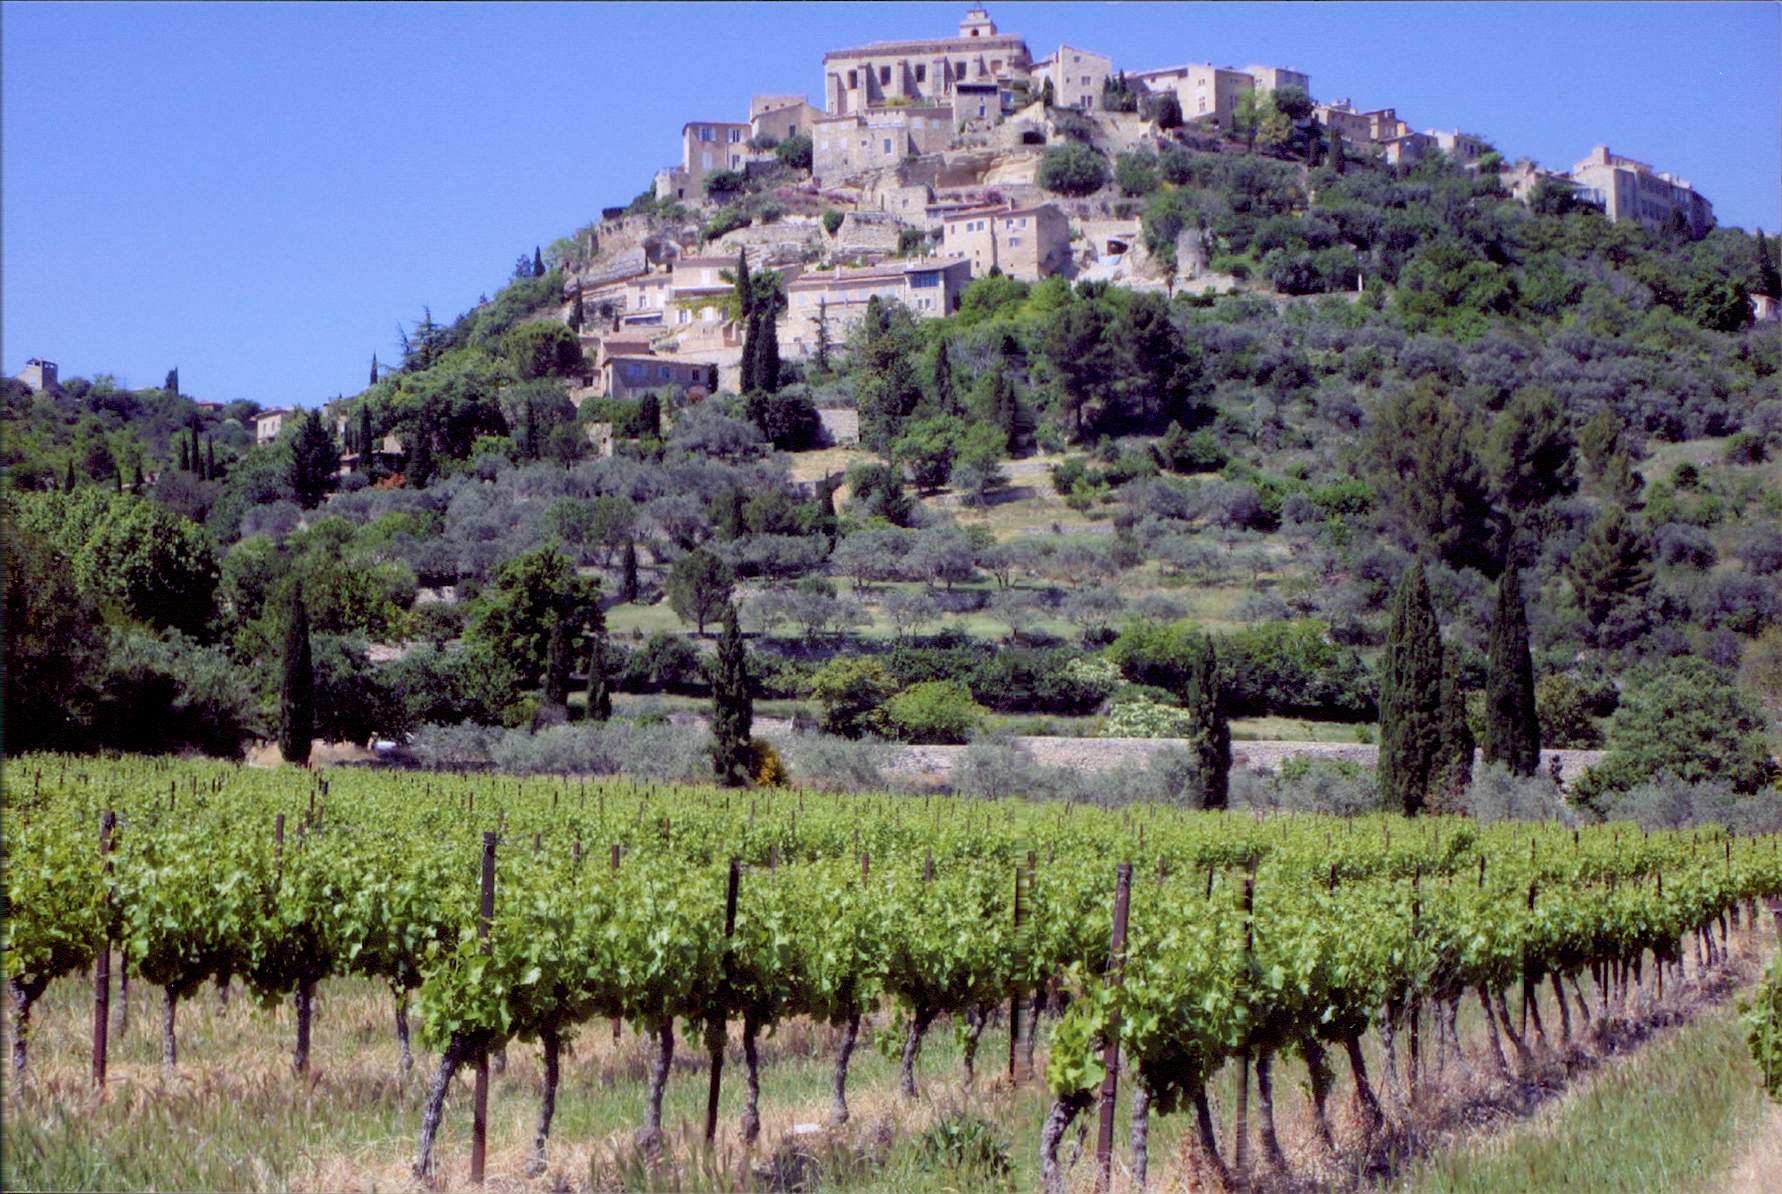 discover provence tours